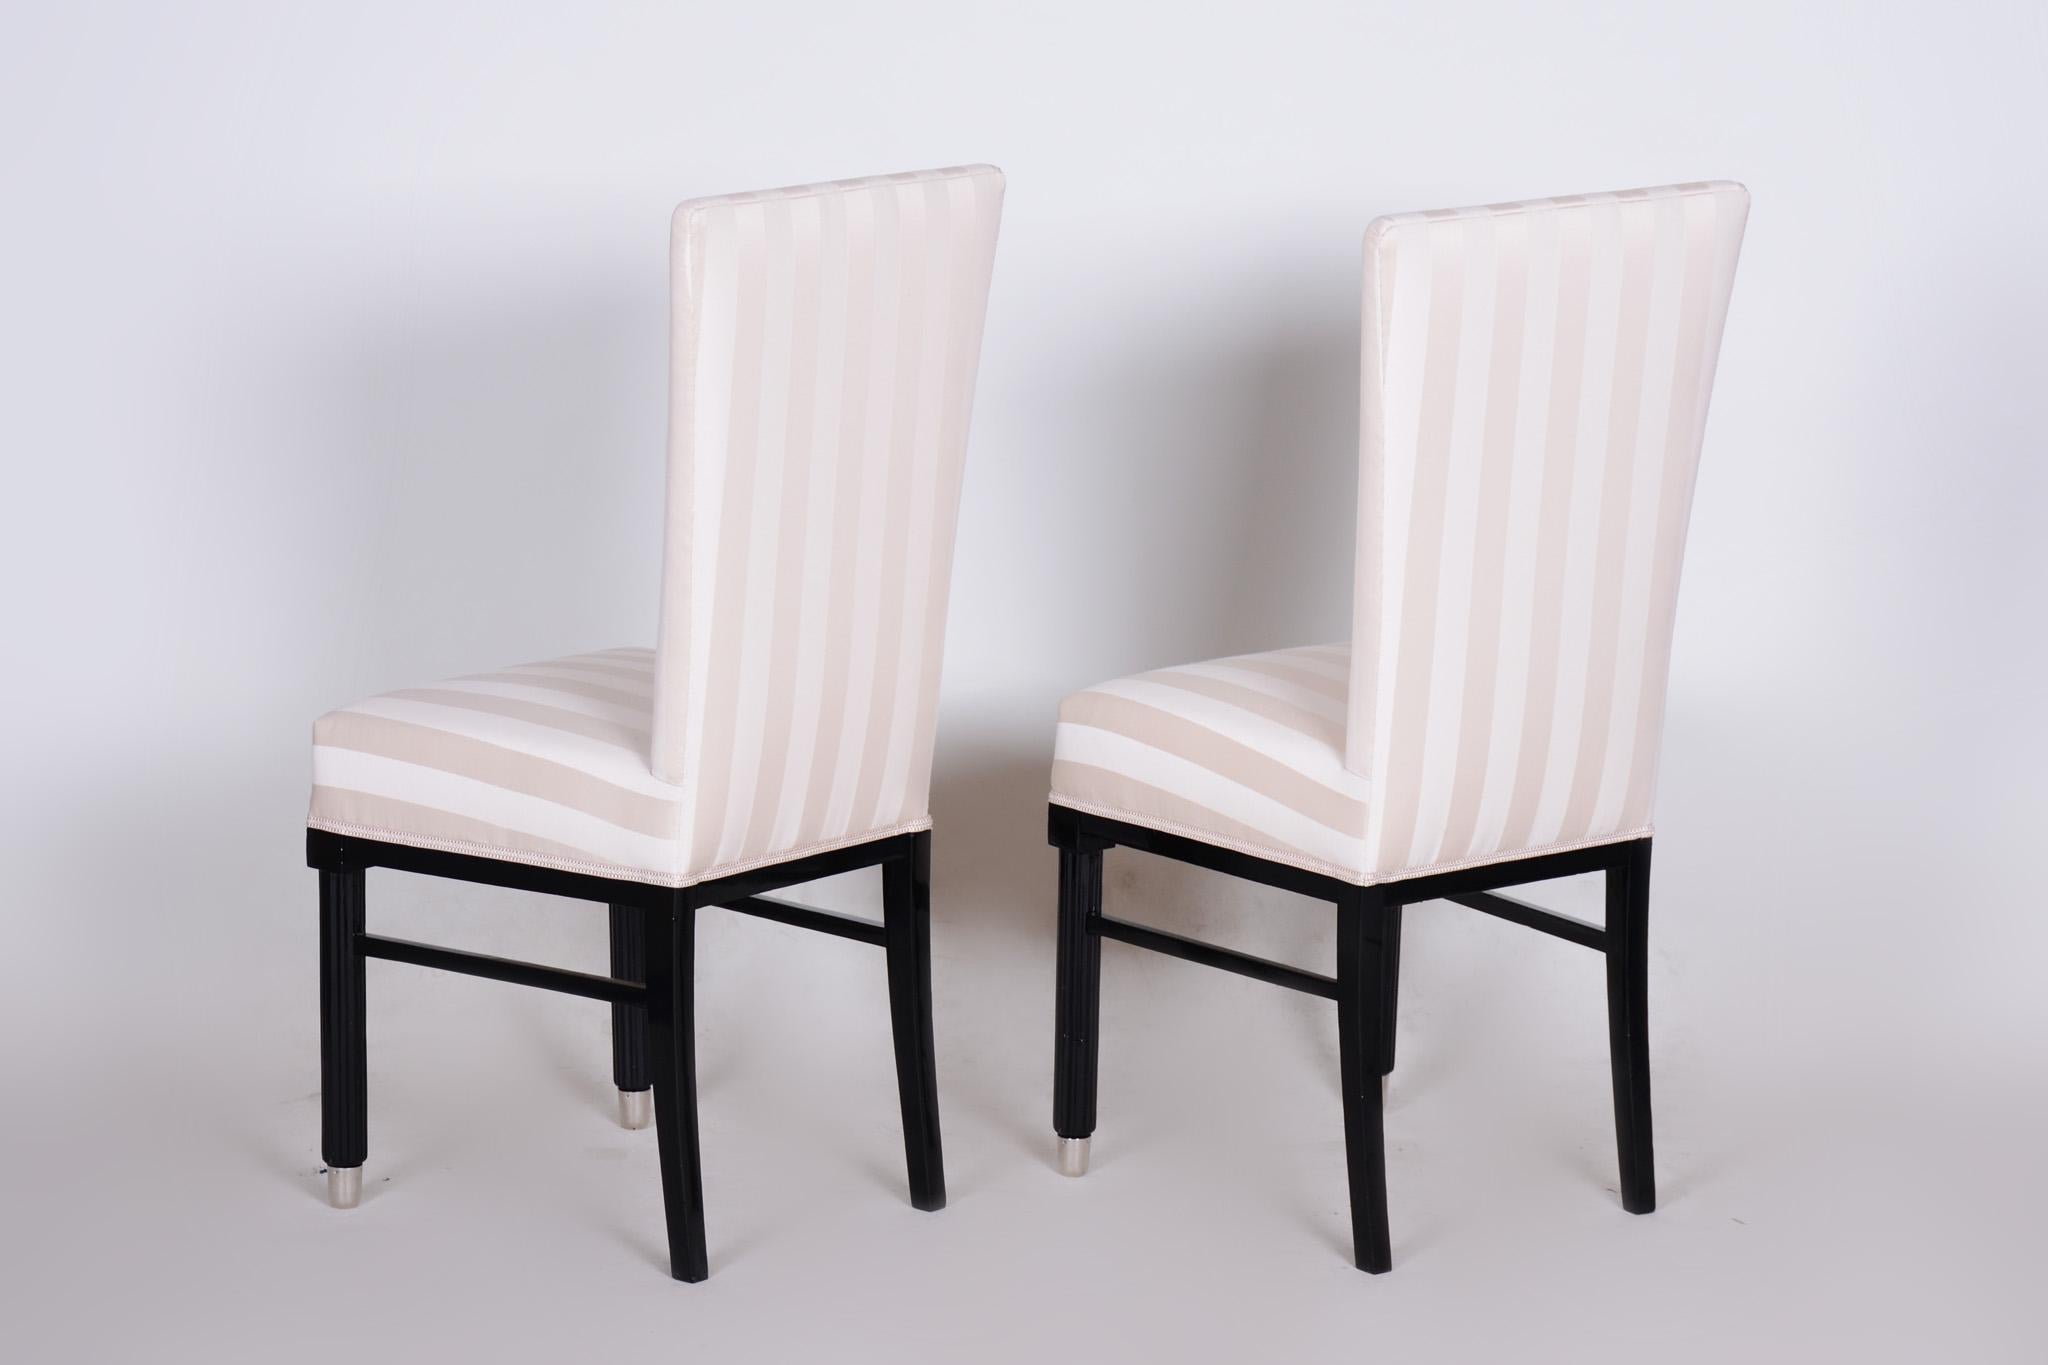 20th Century Pair of French Art Deco Chairs, Black Lacquer, New Upholstery 1920s For Sale 2